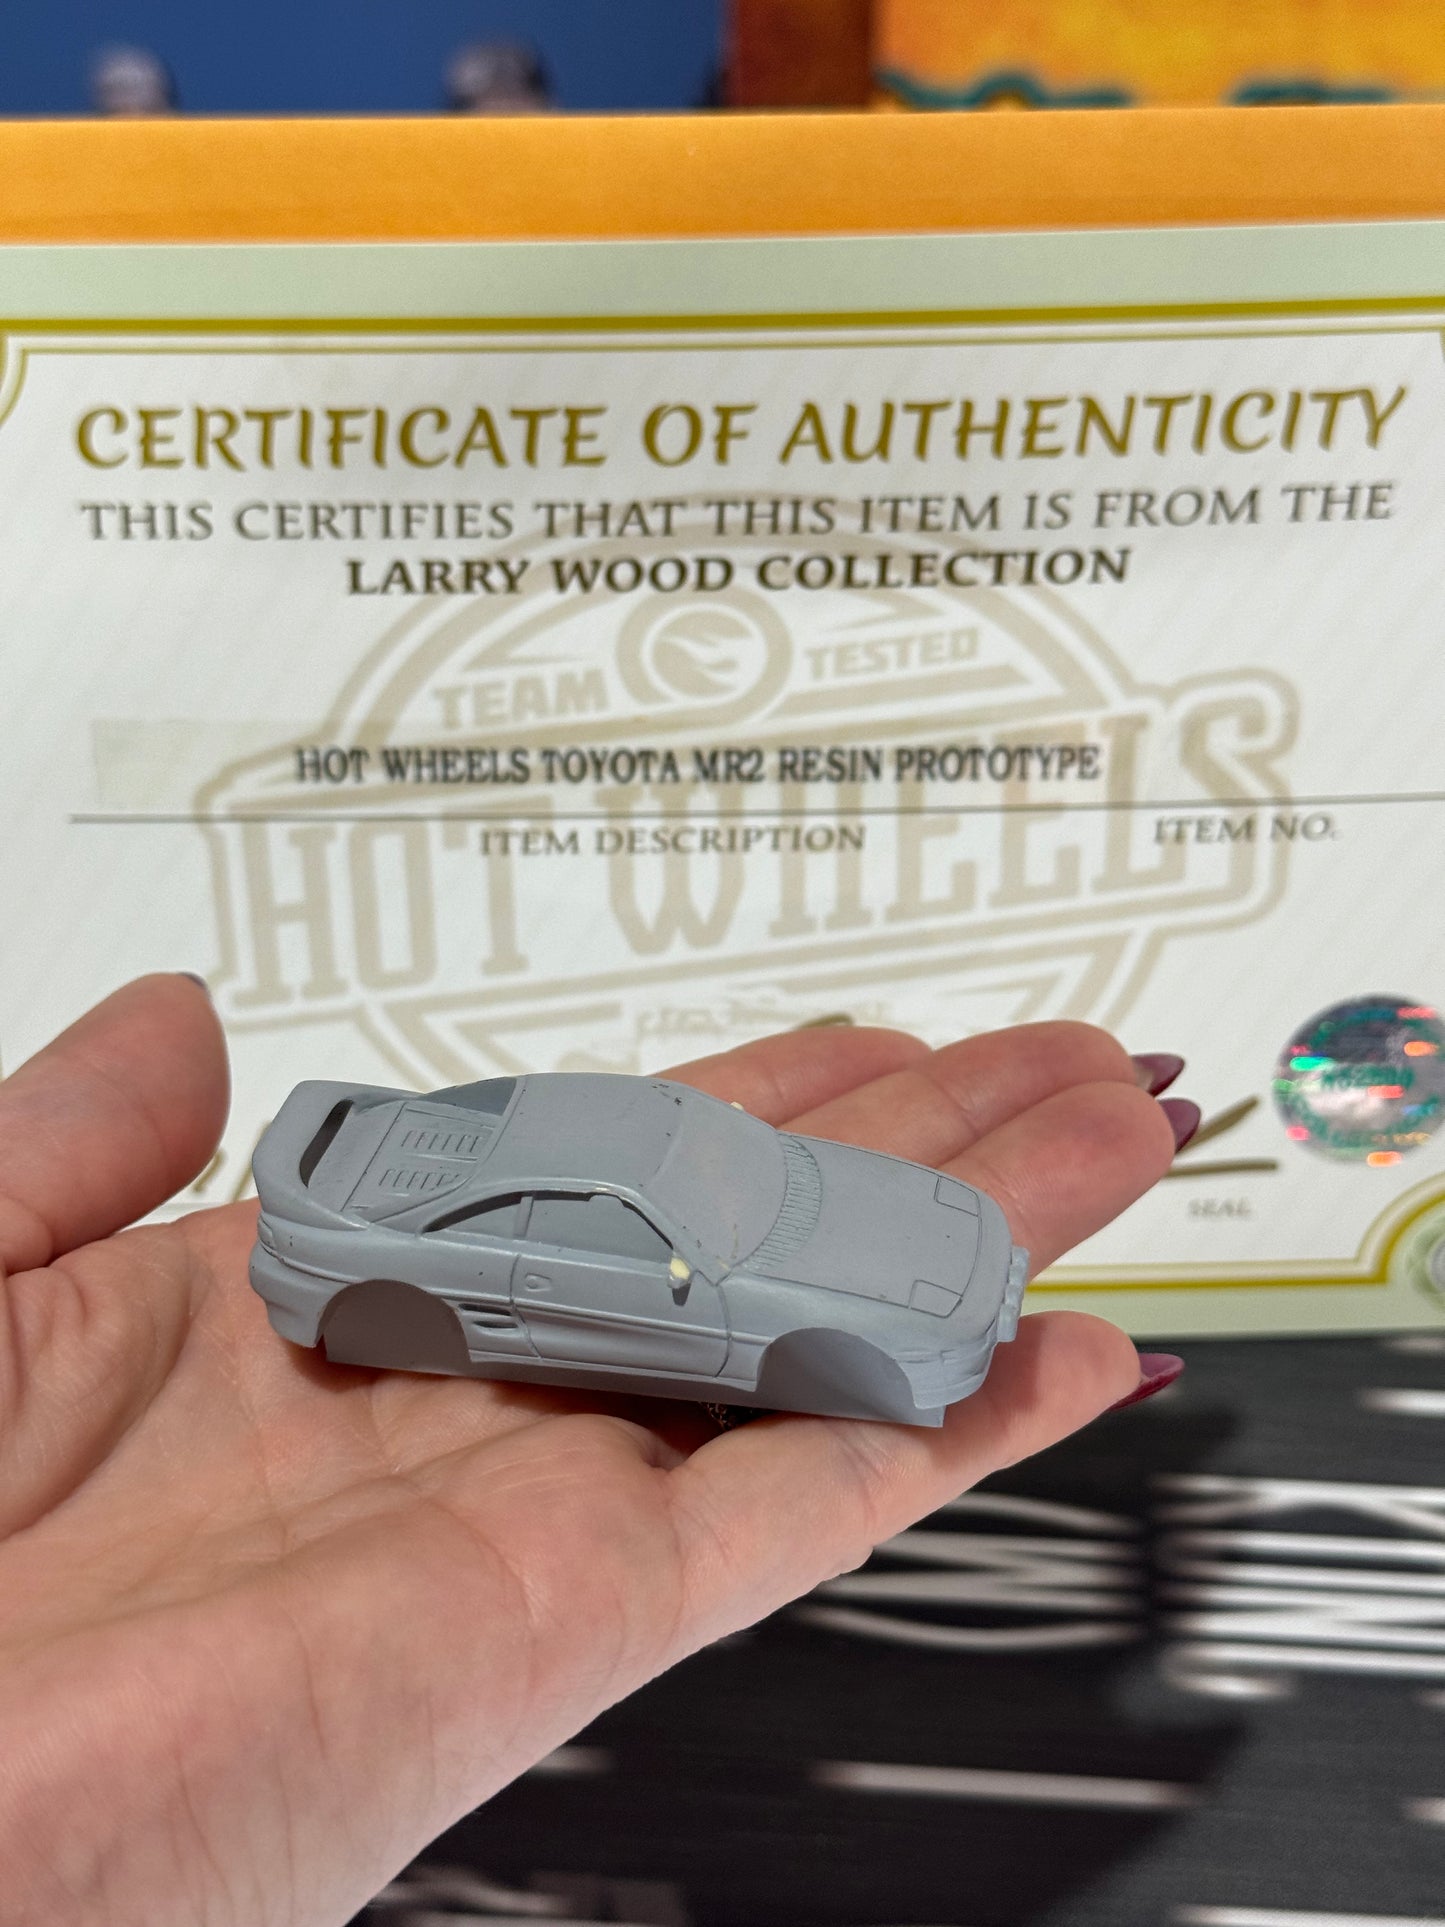 Hot Wheels Toyota MR2 Resin Prototype (Designed by Larry Wood)